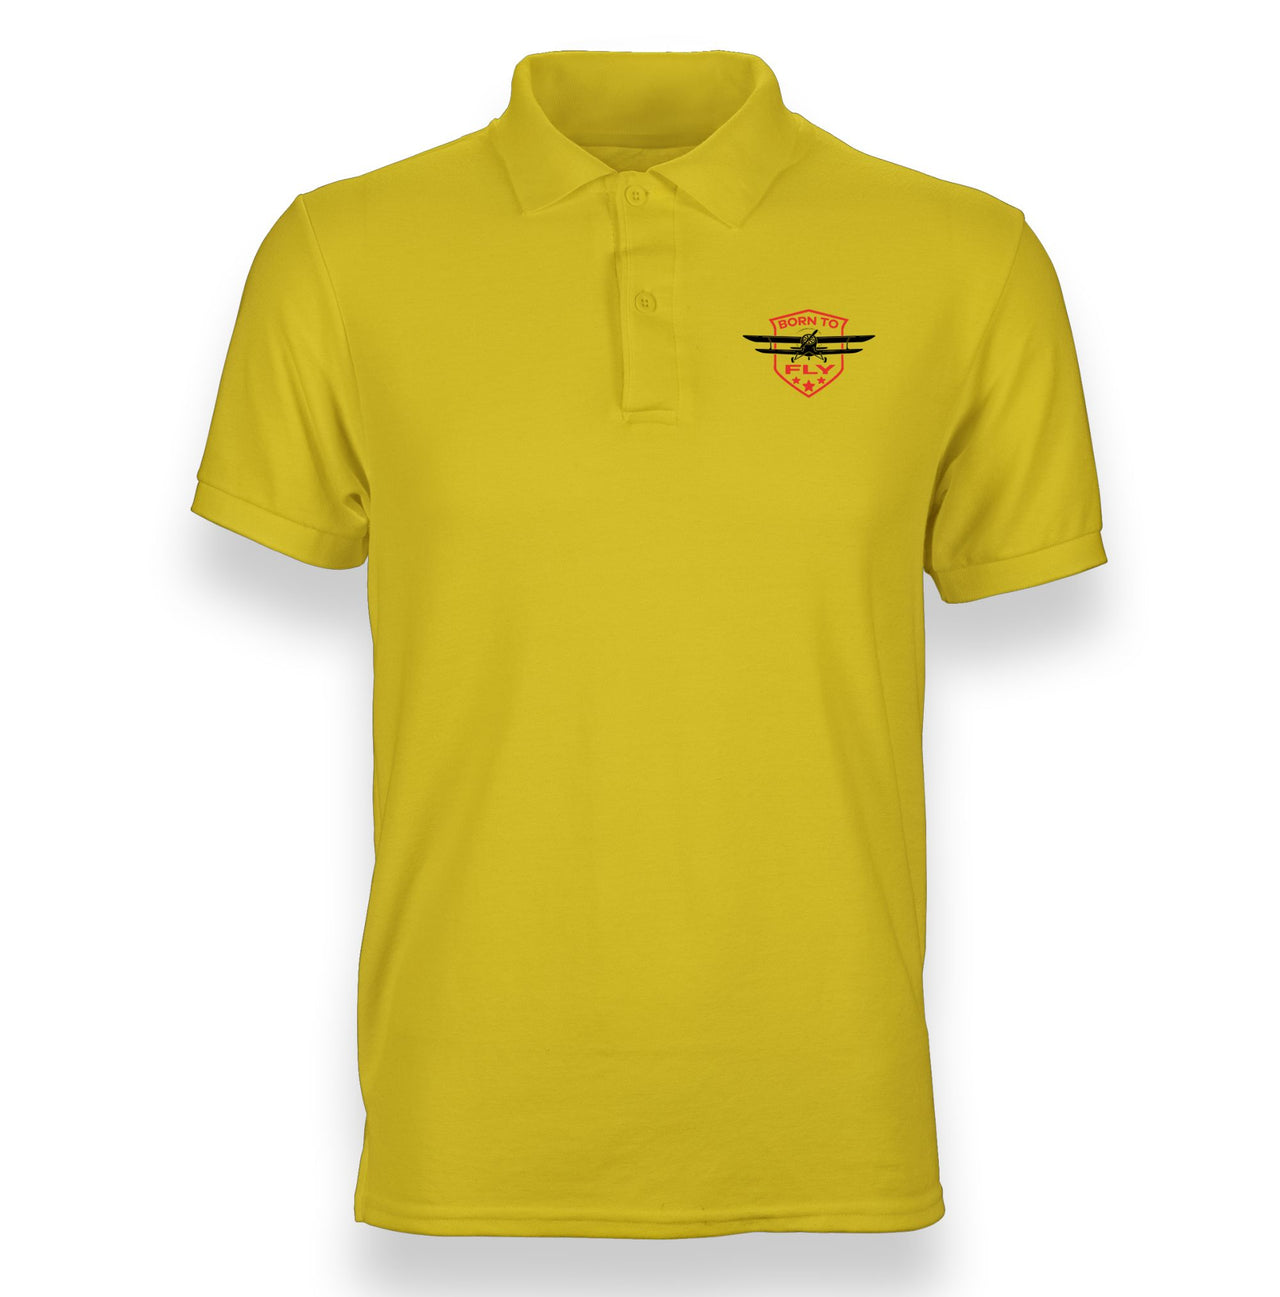 Super Born To Fly Designed "WOMEN" Polo T-Shirts